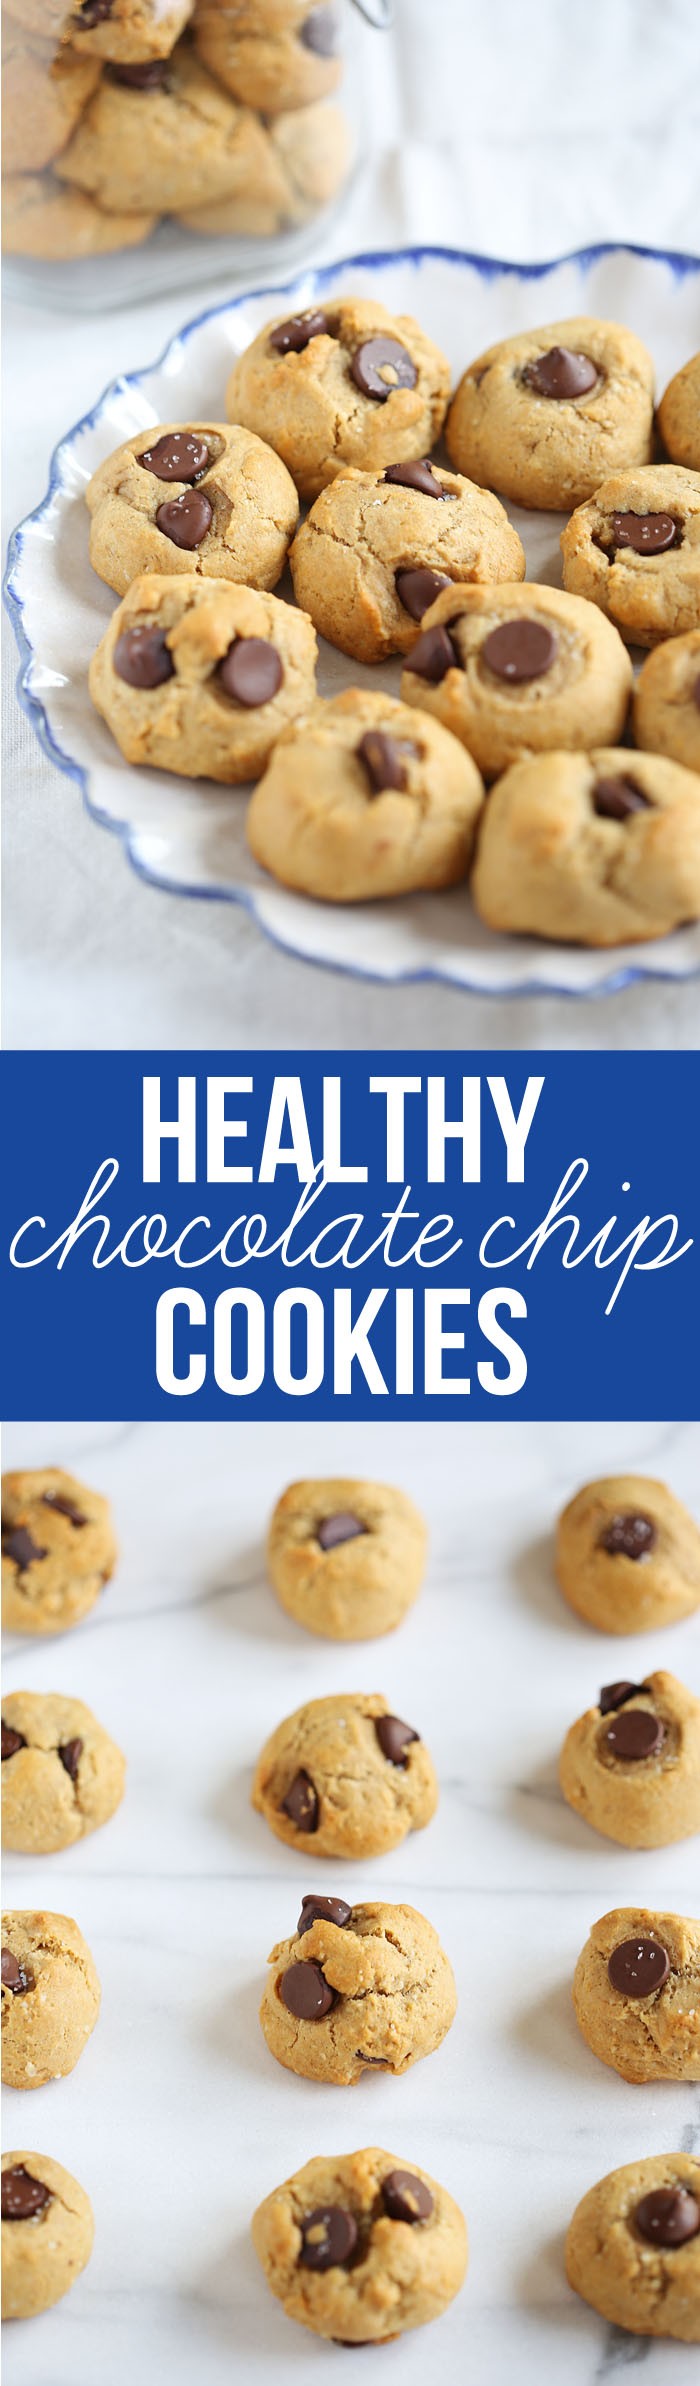 Healthy Chocolate Chip Cookies | eat-yourself-skinny.com